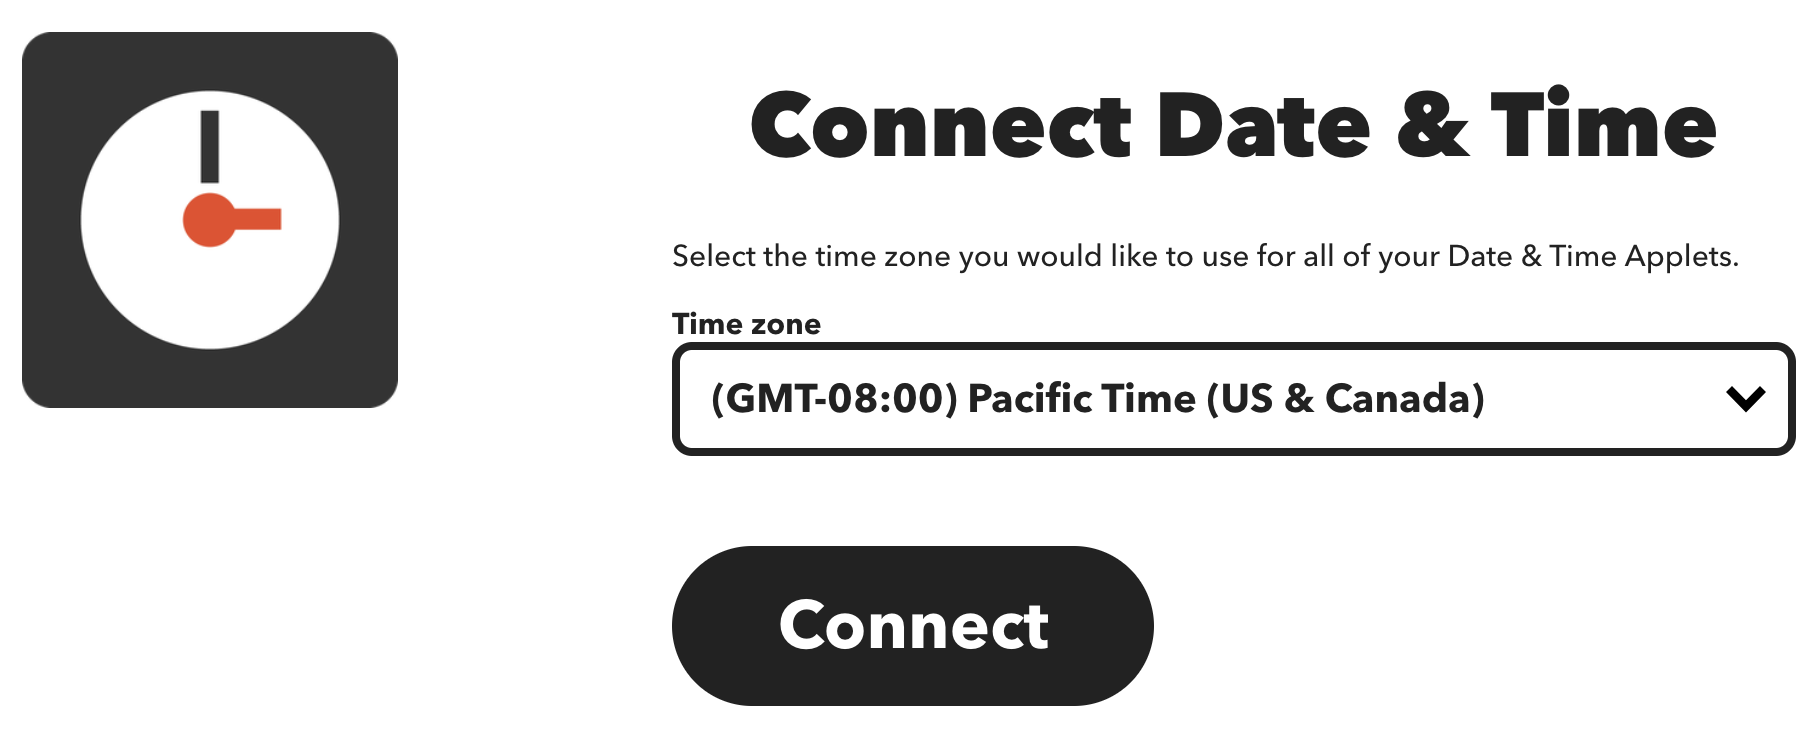 Time zone settings in Date & Time service.